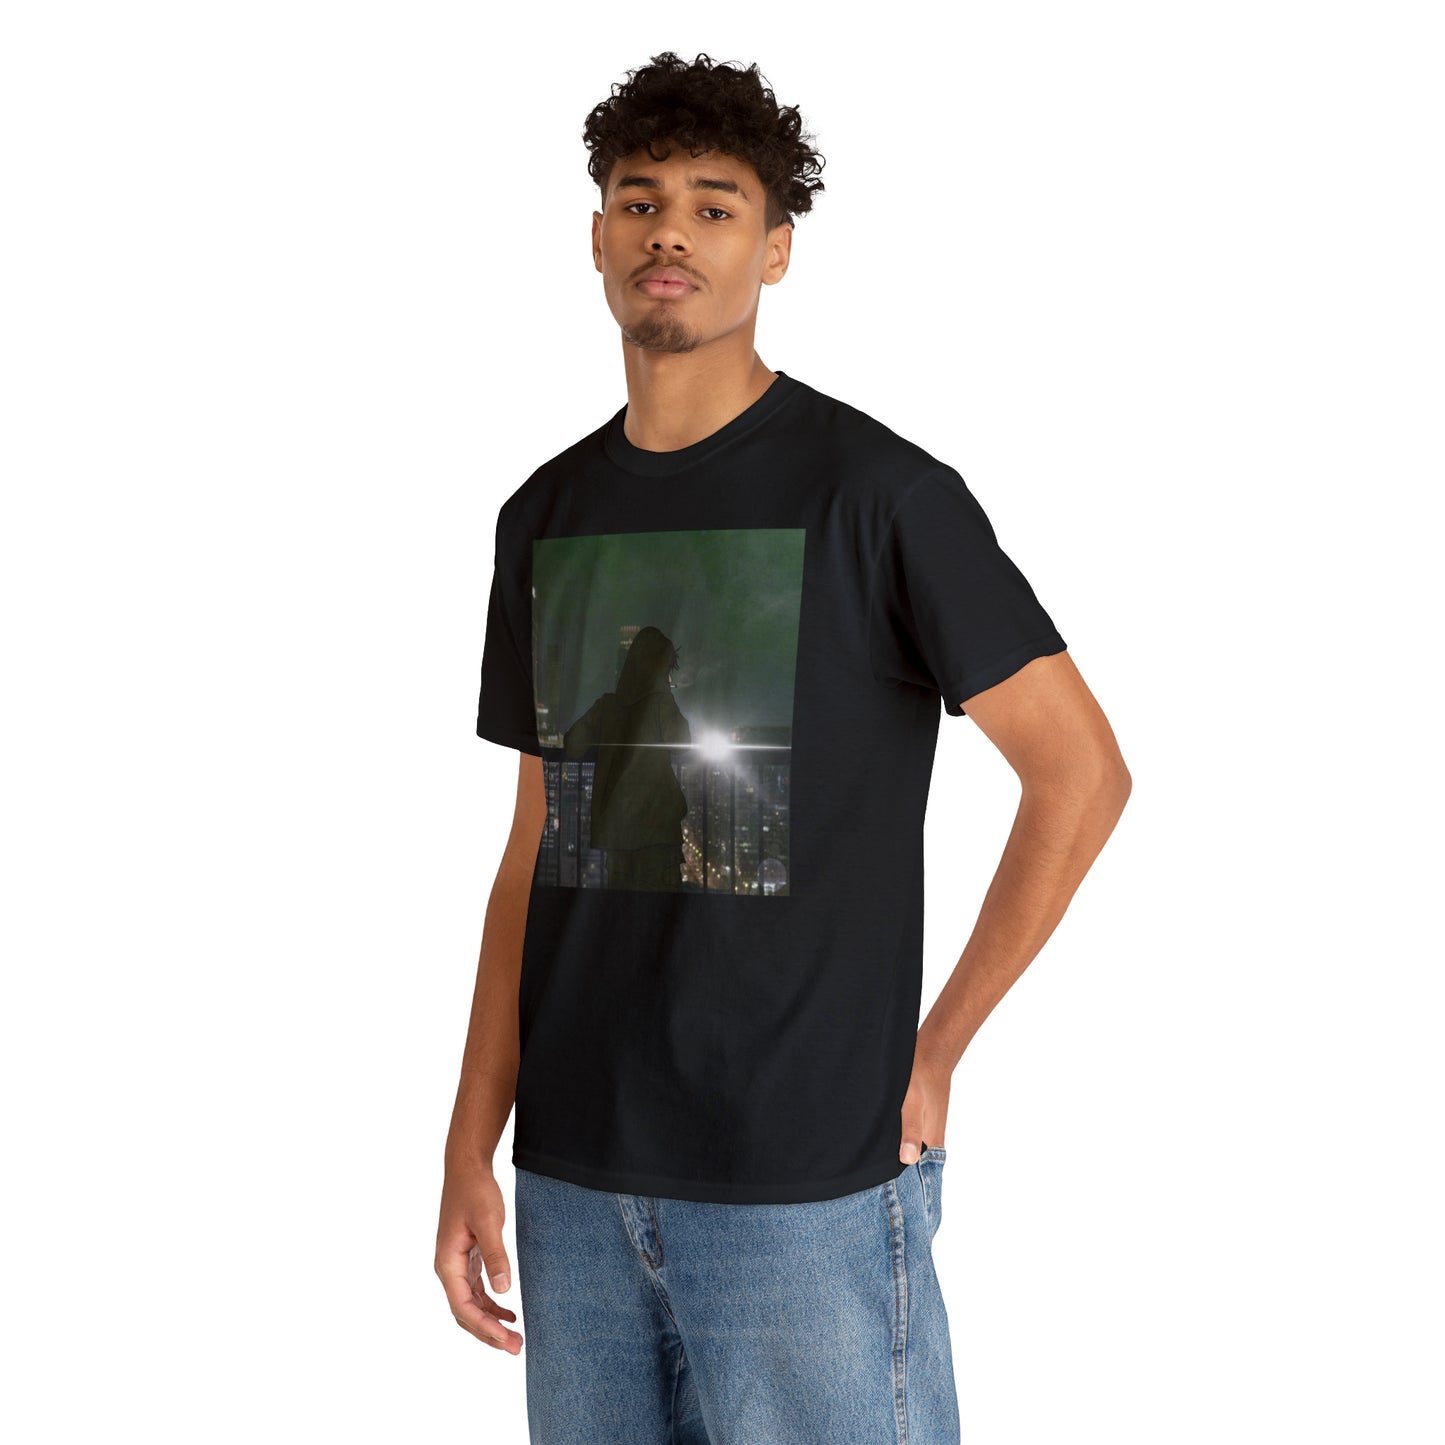 Thoughts at midnight Tee